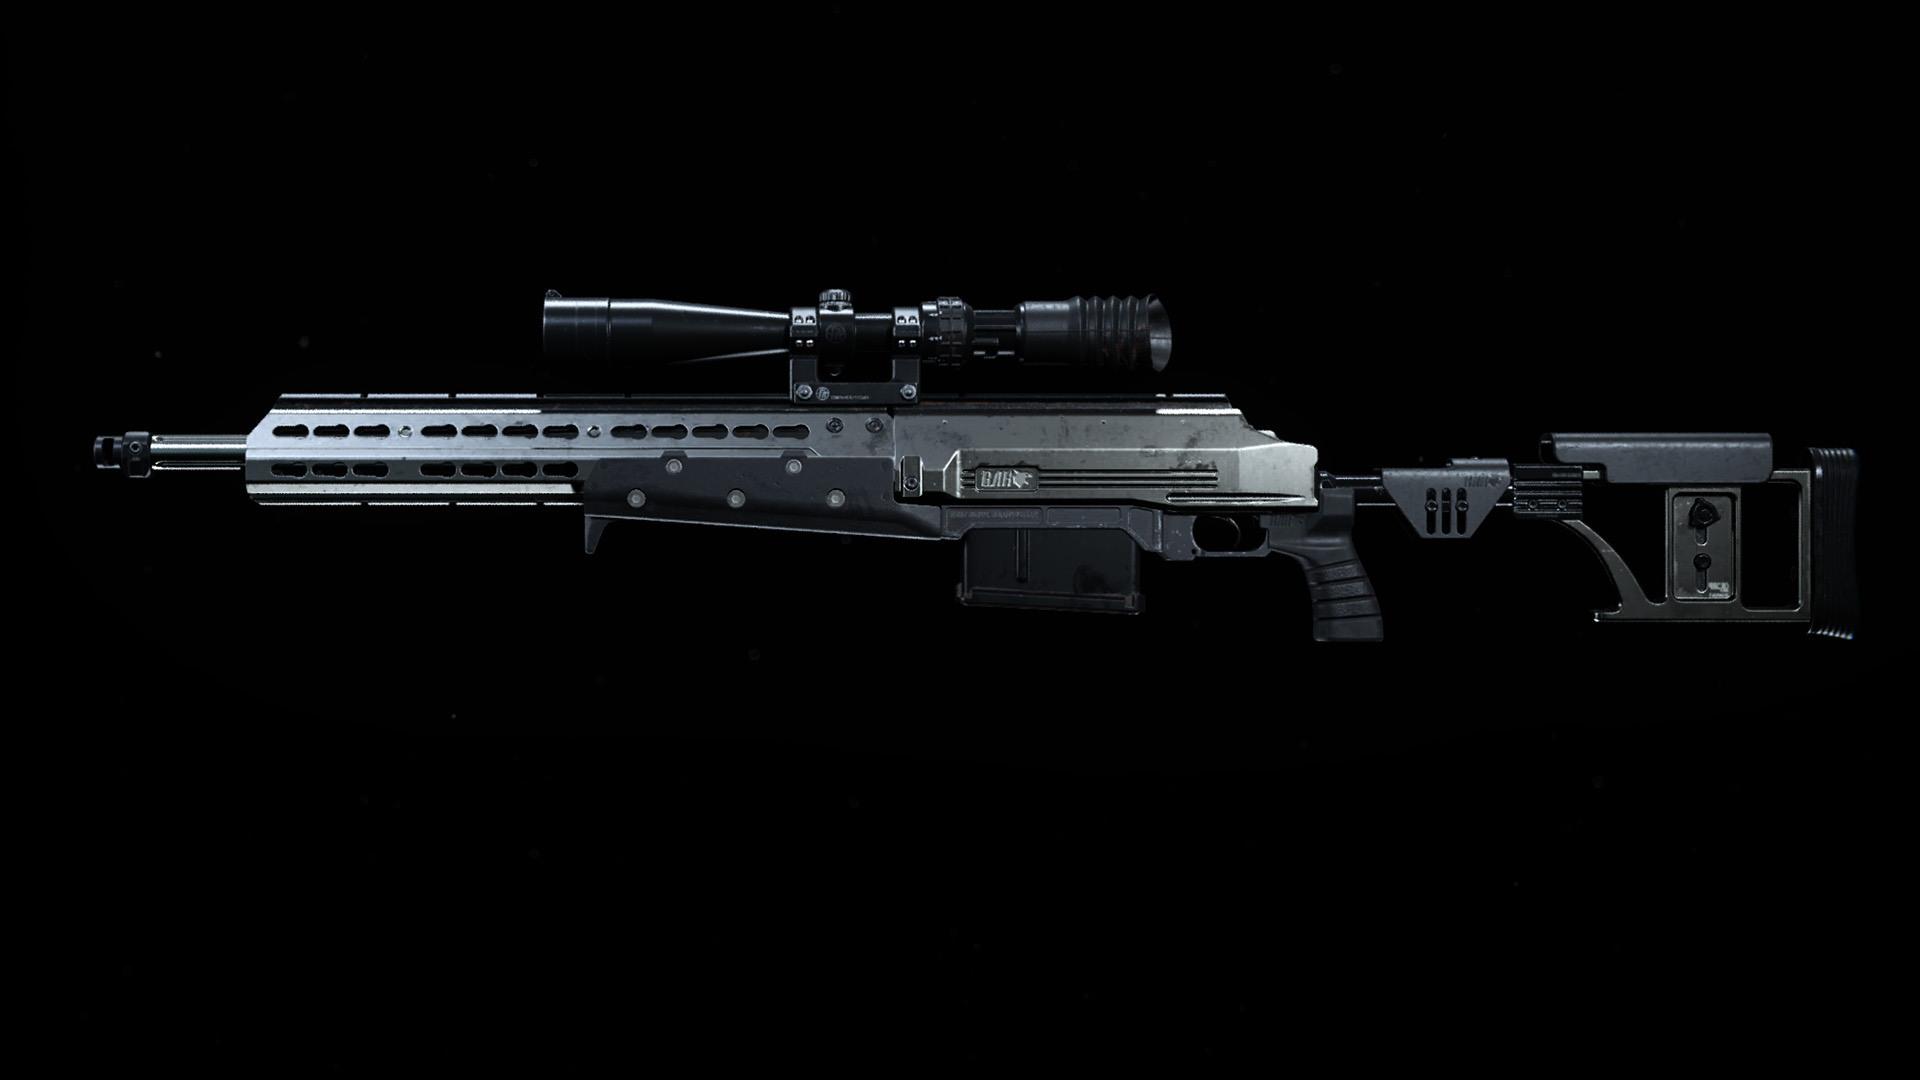 The LW3 Tundra sniper rifle in Call of Duty: Warzone